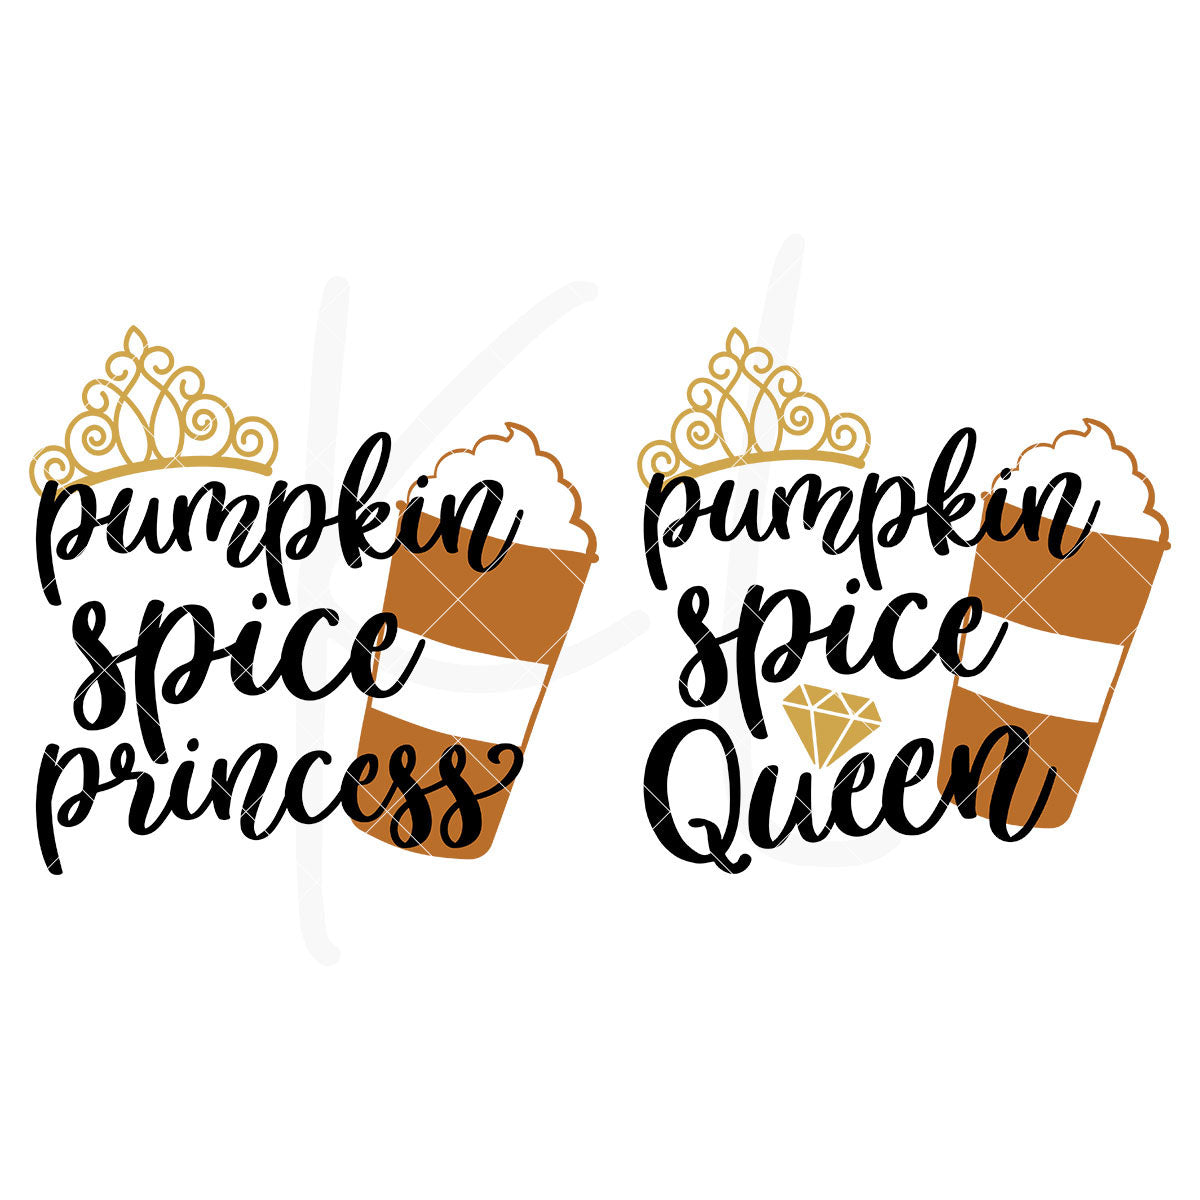 Pumpkin Spice Queen and Princess | SVG DXF EPS PNG Cut Files